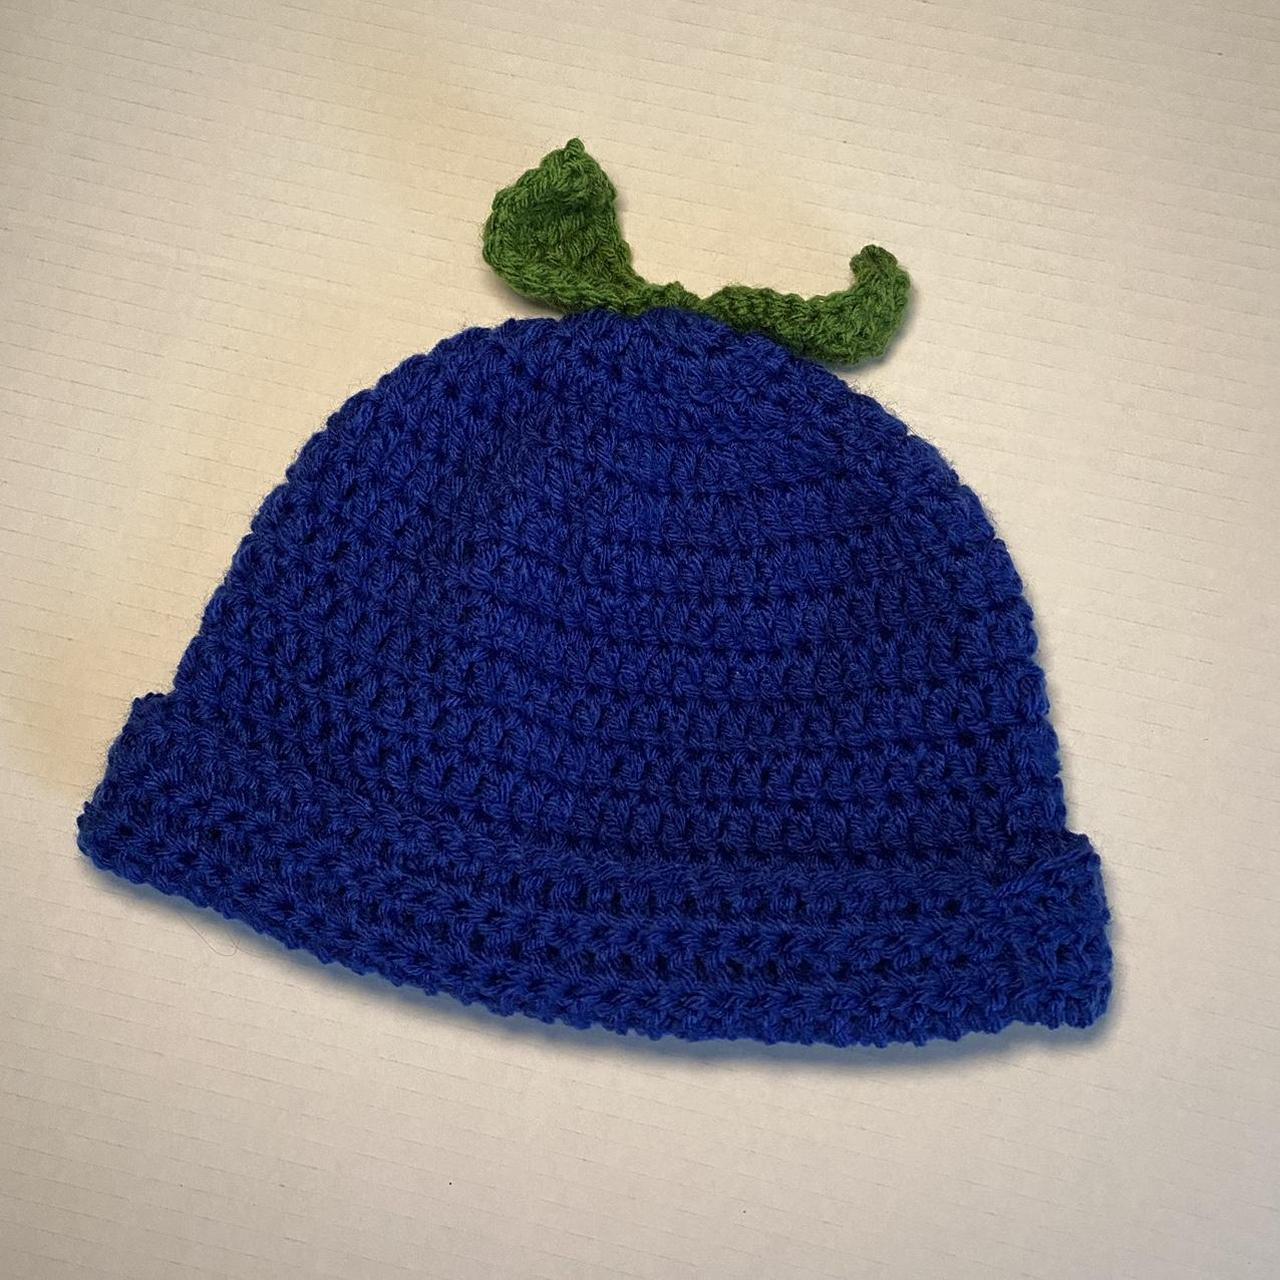 Crochet blueberry beanie with leaves Stretchy, cute, - Depop